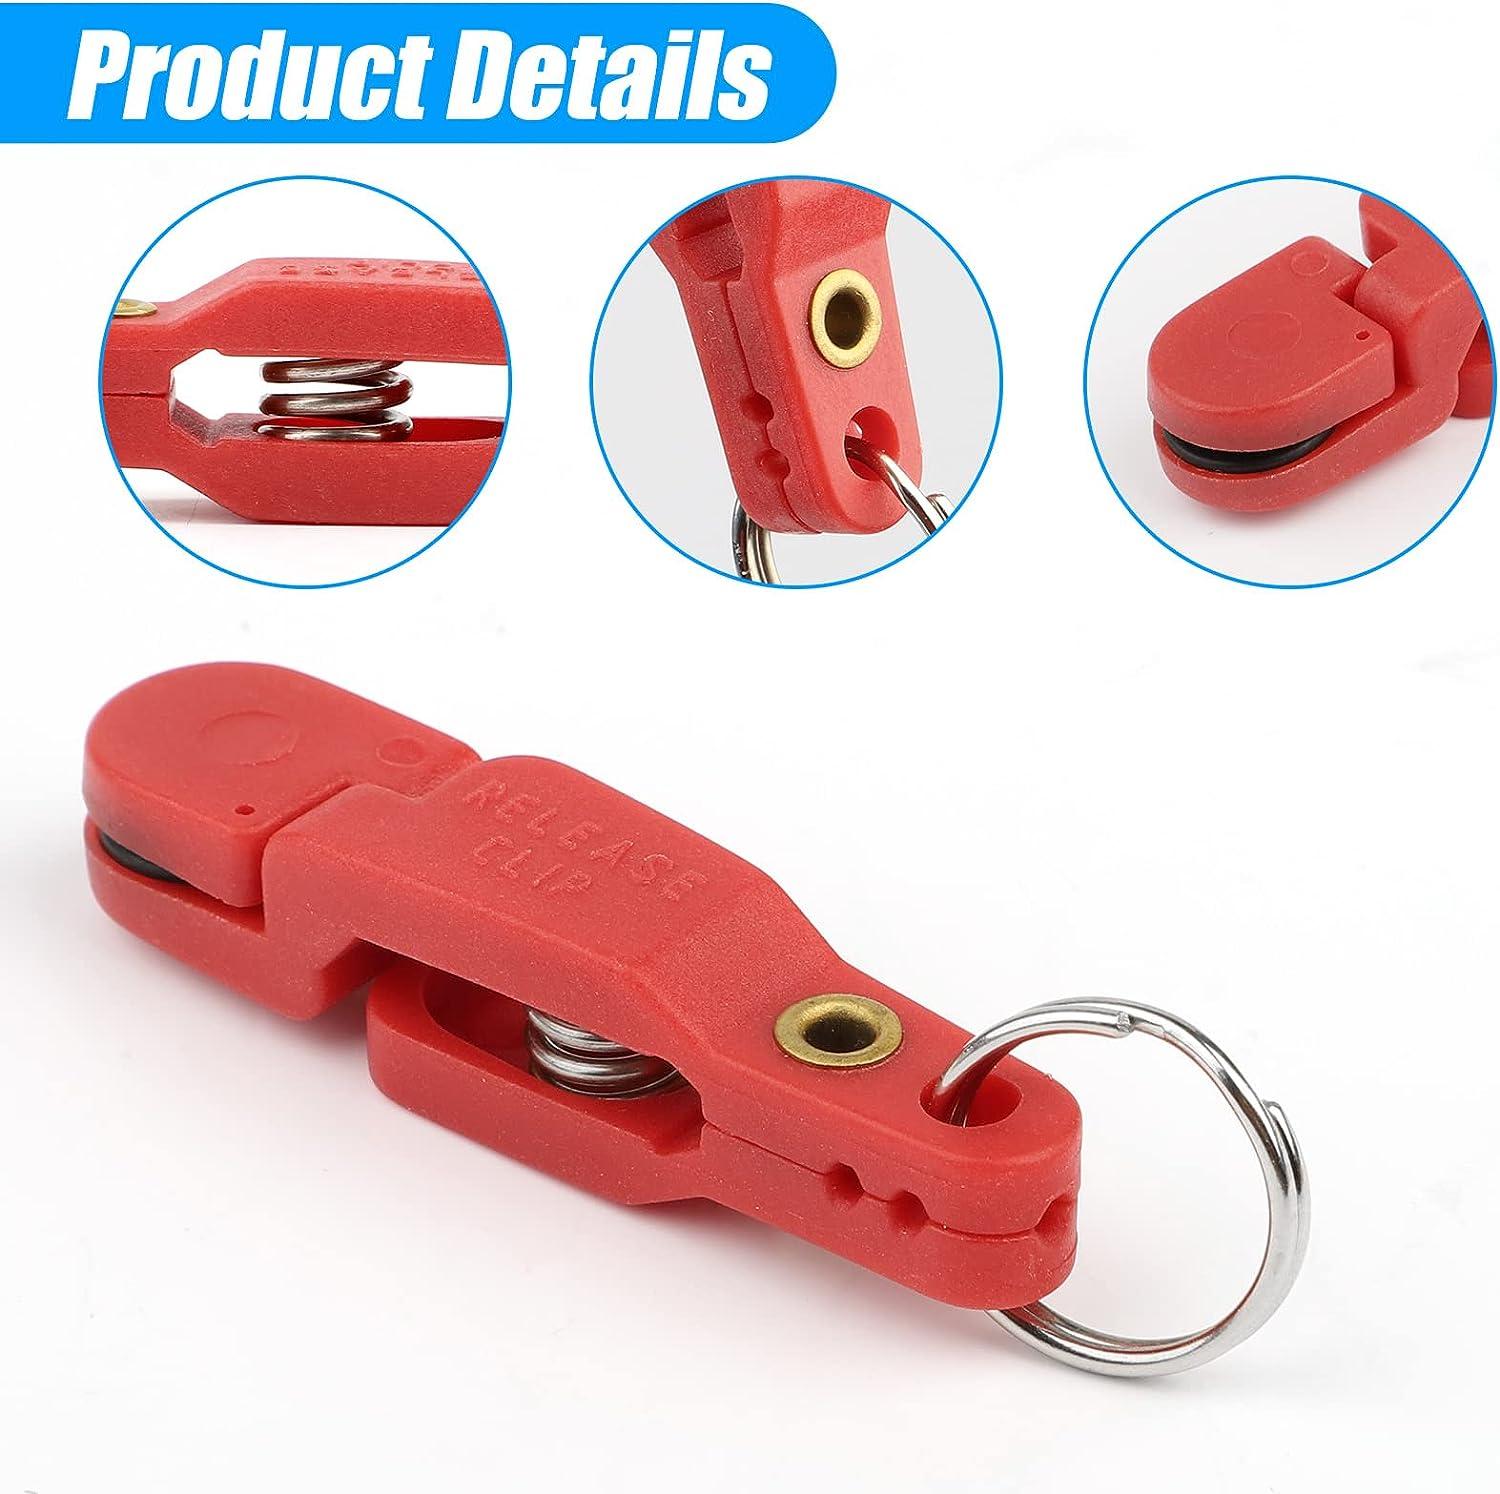 YUNNLEZT 10pcs Heavy Tension Downrigger Release Clips for Offshore Fishing, Planer Board, Weight, Kite